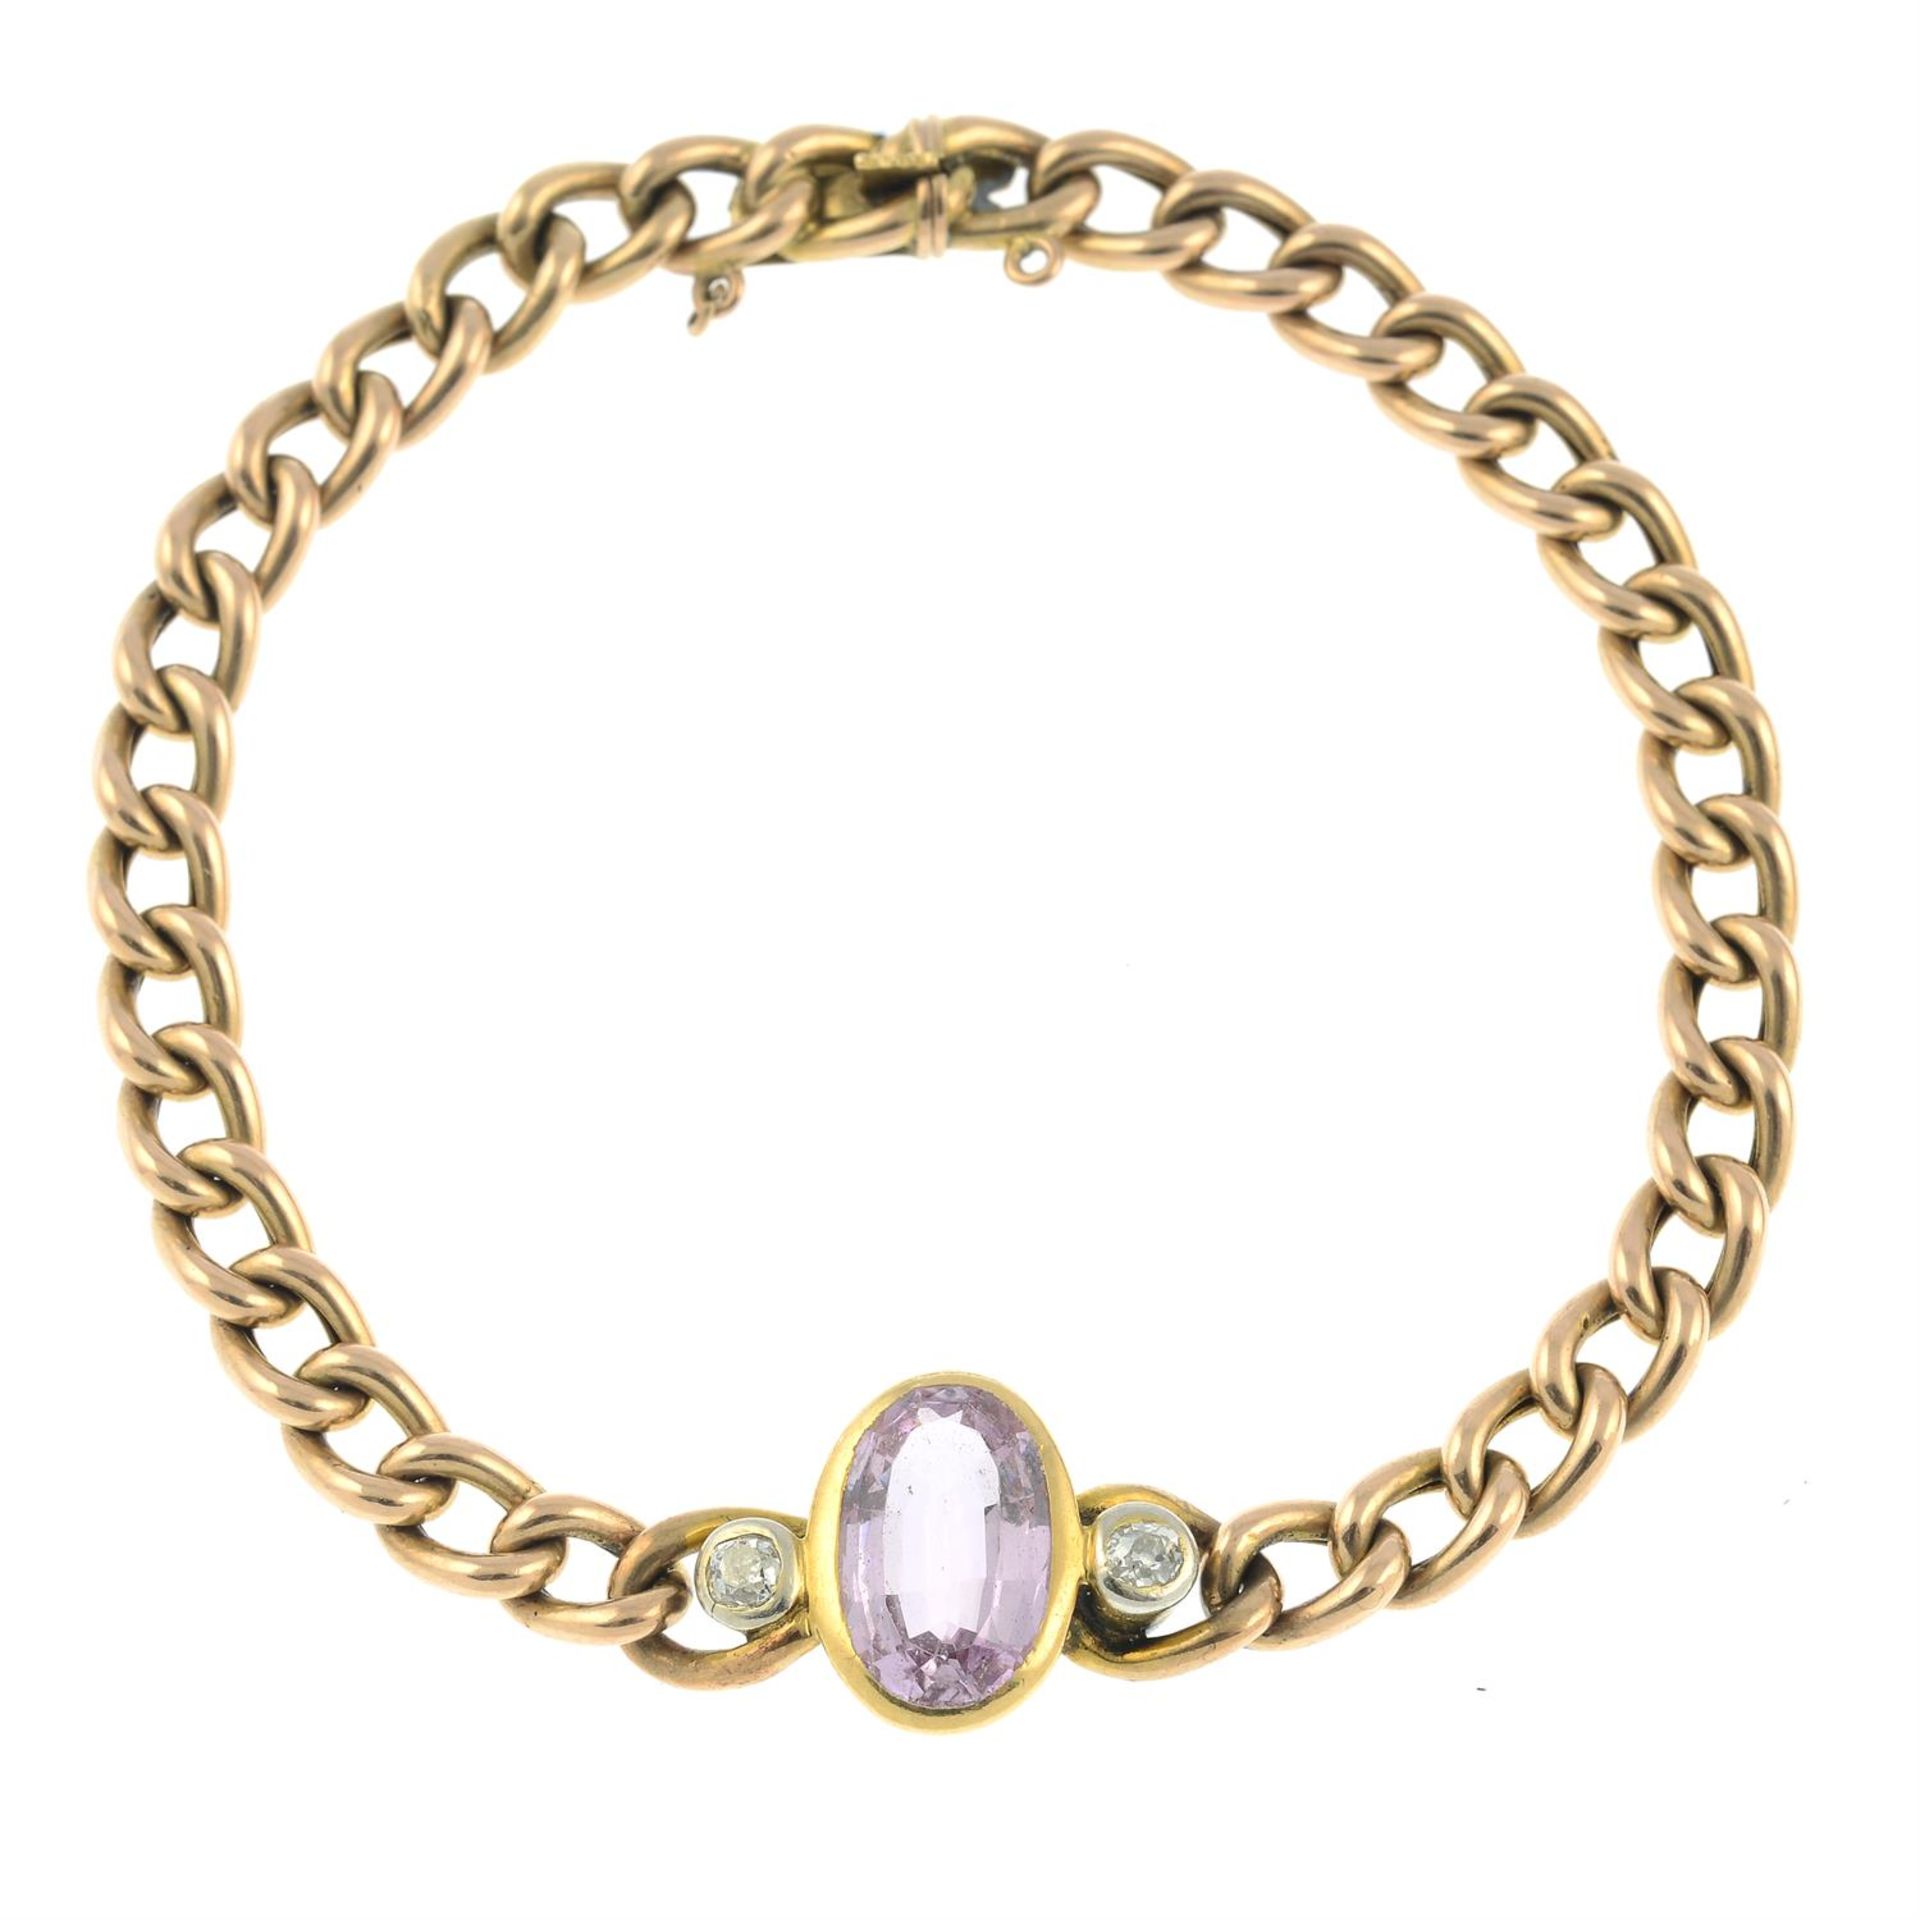 An early 20th century gold curb-link bracelet, with pink topaz and old-cut diamond sides inset. - Image 2 of 4